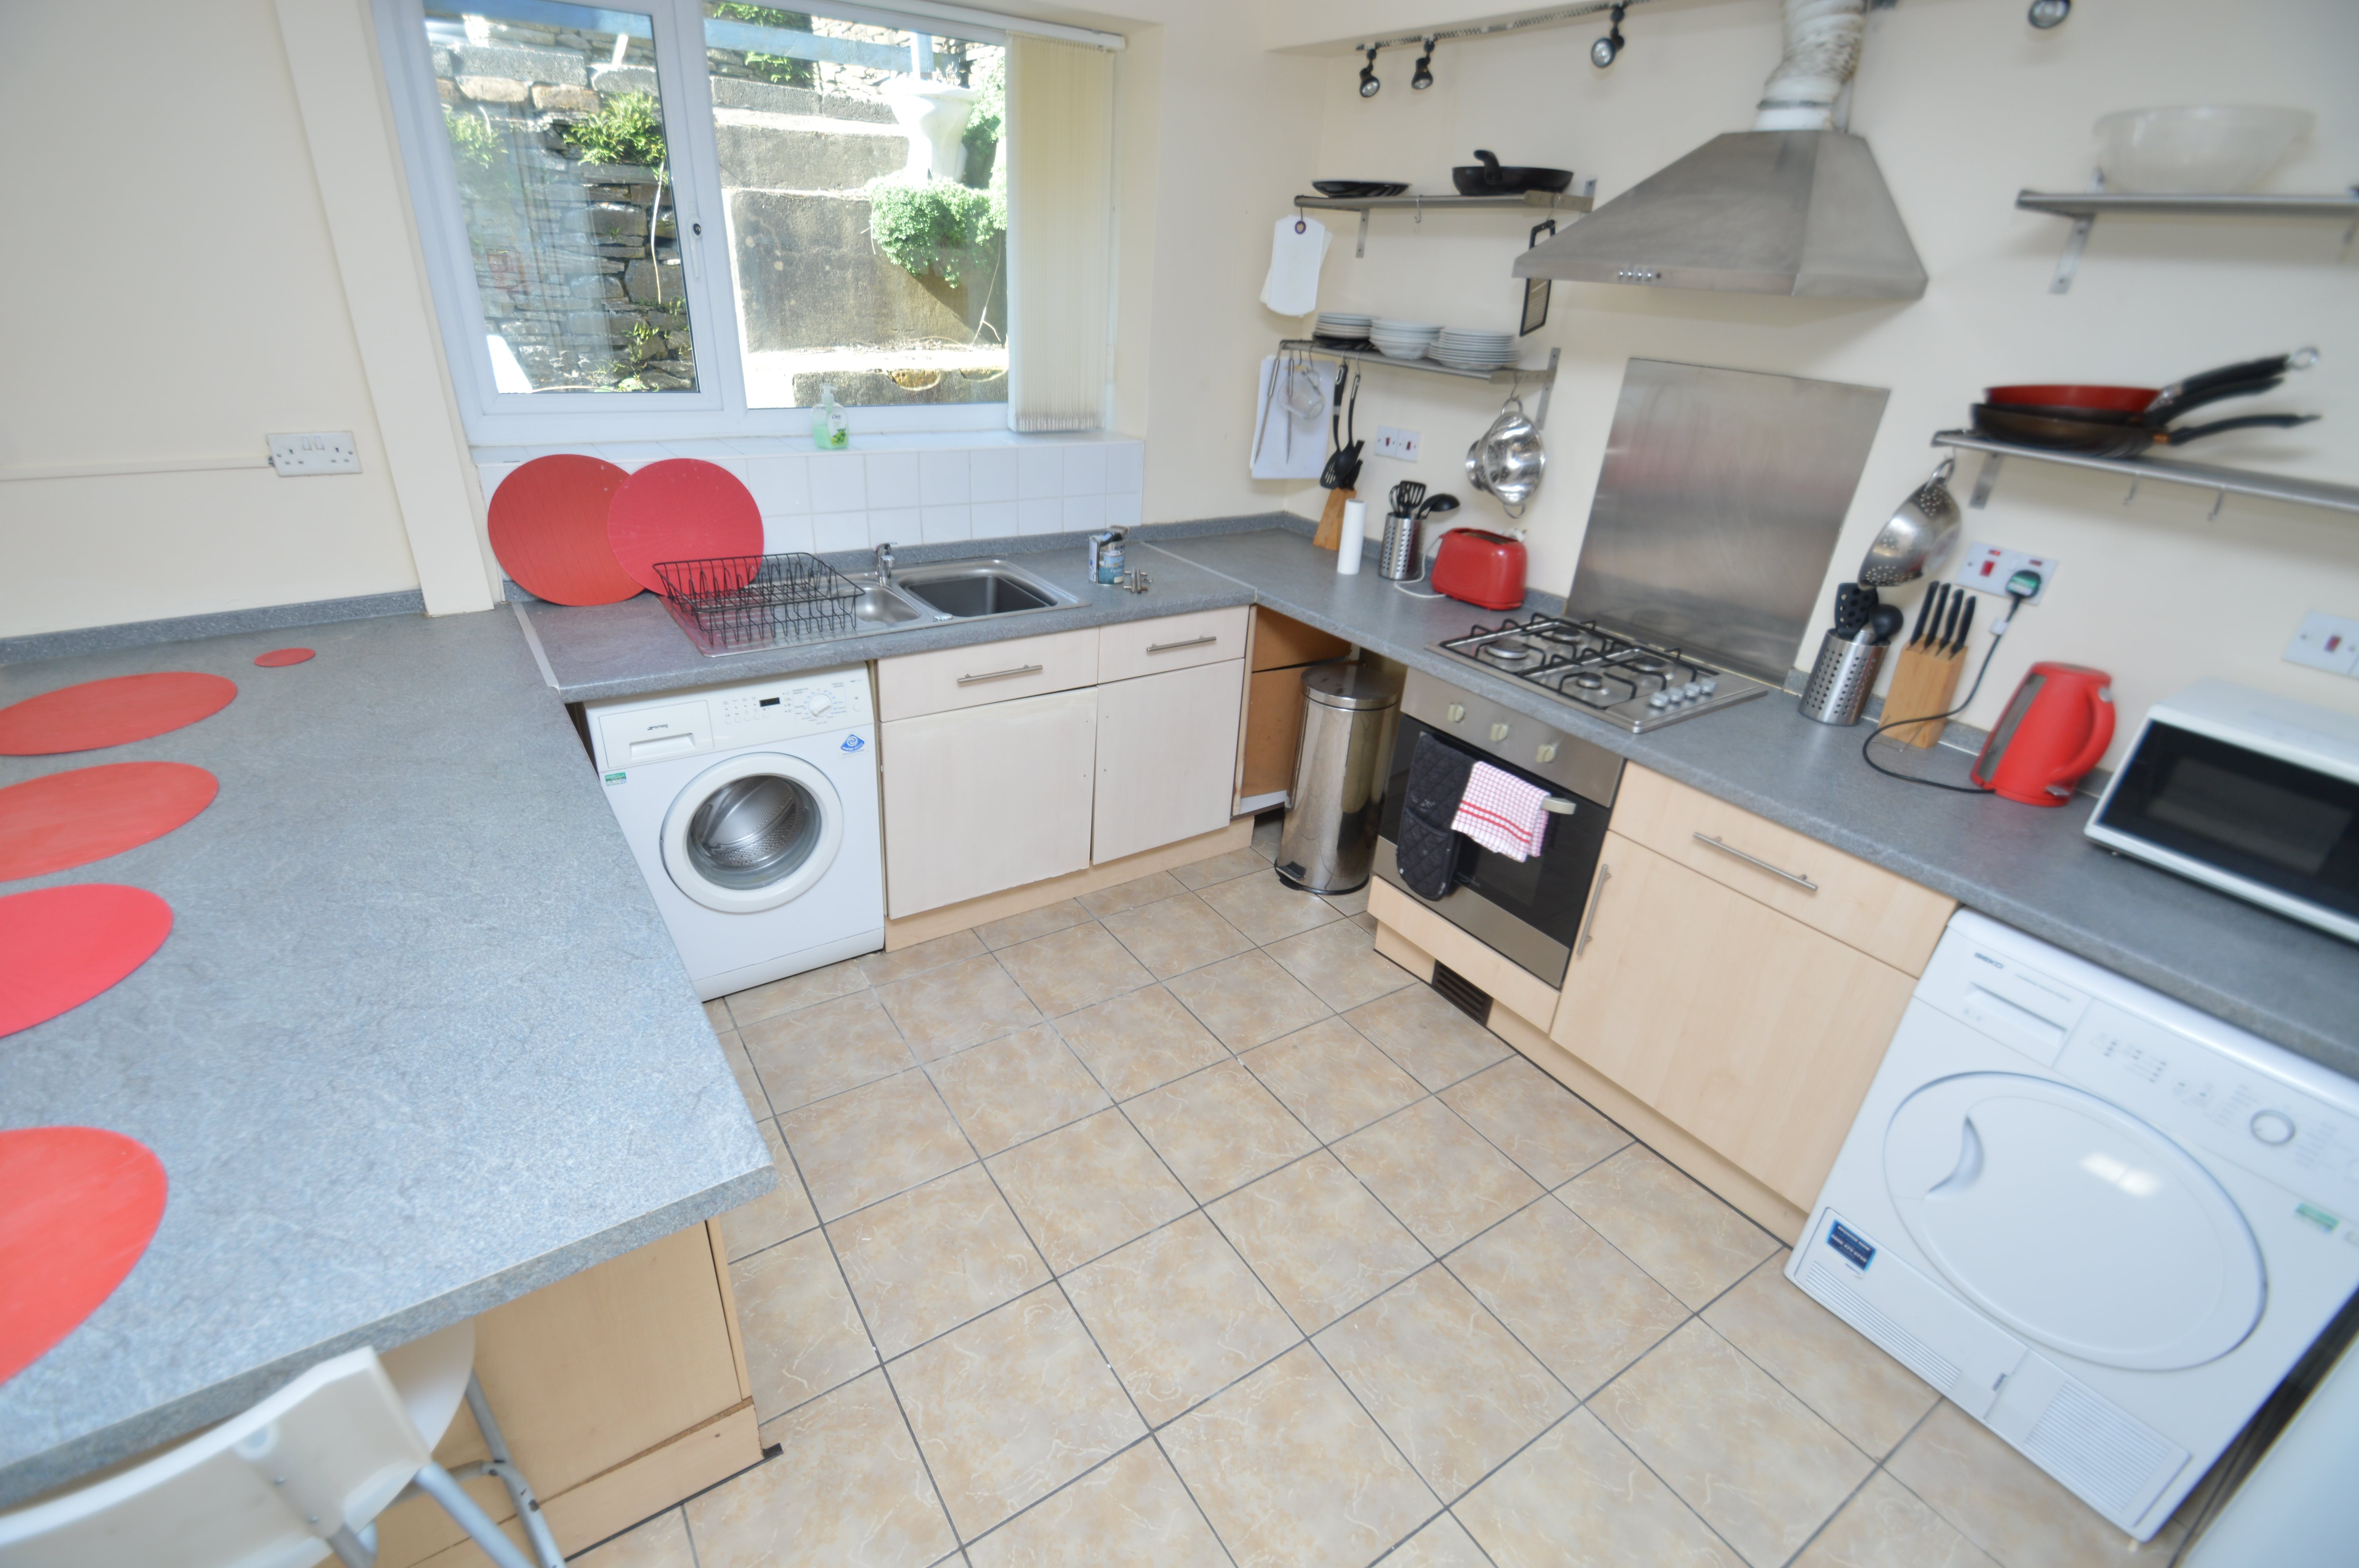 1 bed house / flat share to rent in Wood Road, Treforest 4